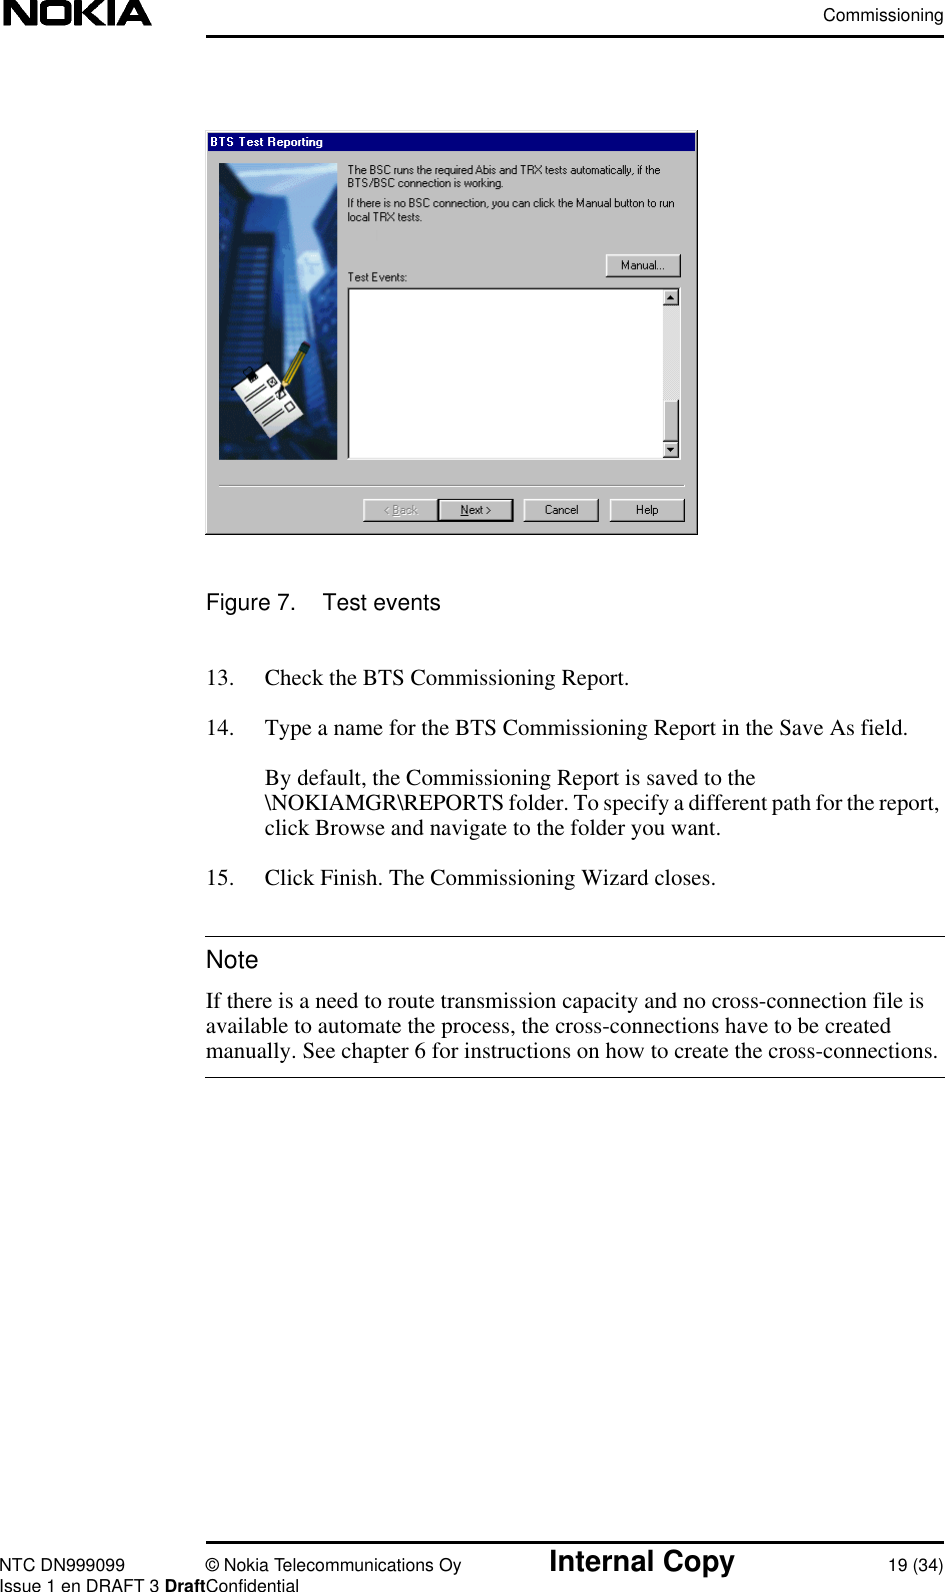 CommissioningNTC DN999099 © Nokia Telecommunications Oy Internal Copy 19 (34)Issue 1 en DRAFT 3 DraftConfidentialNoteFigure 7. Test events13. Check the BTS Commissioning Report.14. Type a name for the BTS Commissioning Report in the Save As field.By default, the Commissioning Report is saved to the\NOKIAMGR\REPORTS folder. To specify a different path for the report,click Browse and navigate to the folder you want.15. Click Finish. The Commissioning Wizard closes.If there is a need to route transmission capacity and no cross-connection file isavailable to automate the process, the cross-connections have to be createdmanually. See chapter 6 for instructions on how to create the cross-connections.